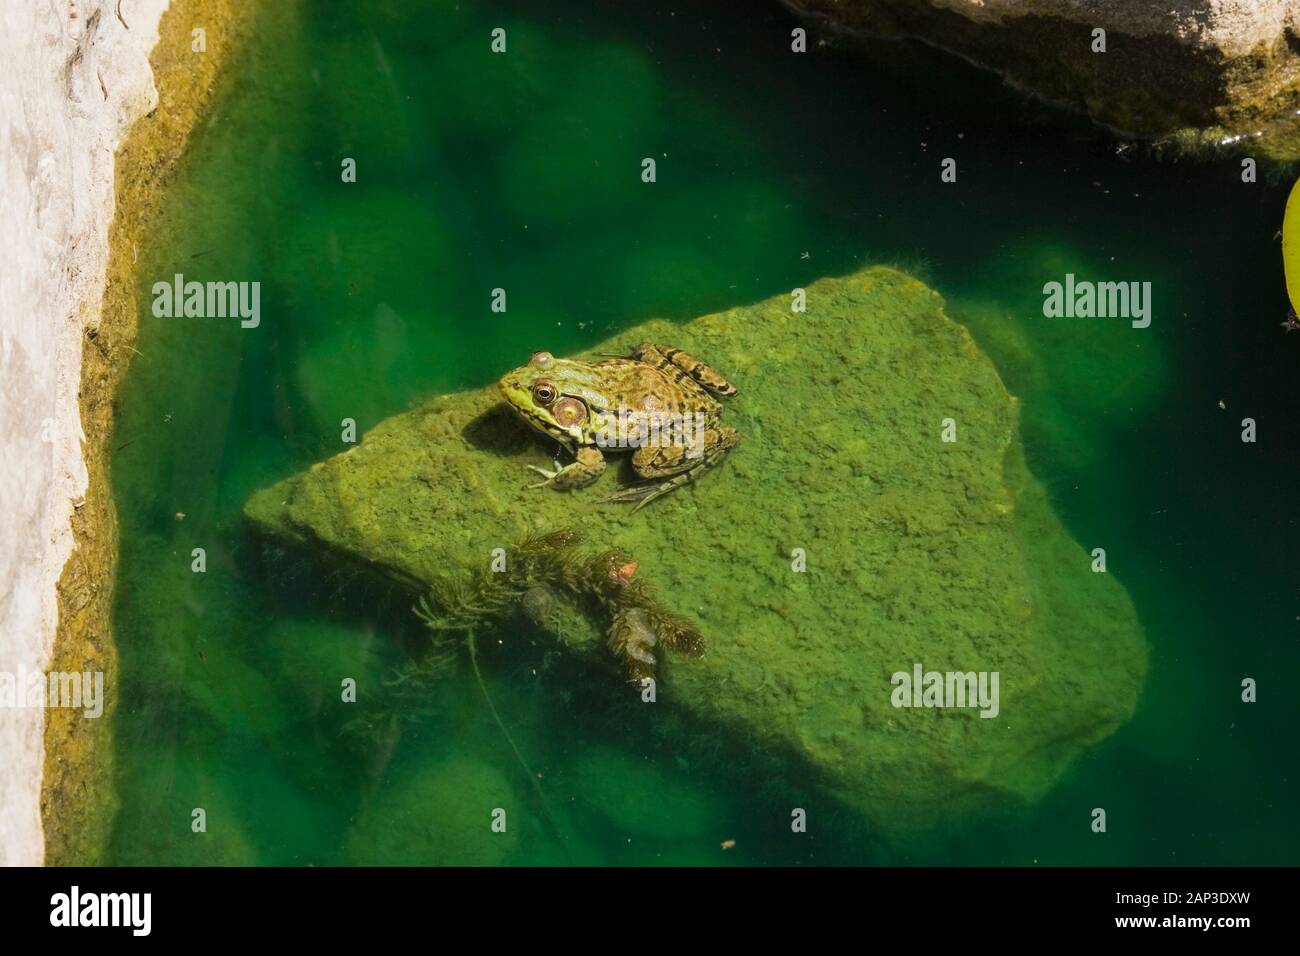 Close-up of Rana clamitans - Green Frog resting on a rock covered with Chlorophyta - Green Algae in a pond in late spring Stock Photo